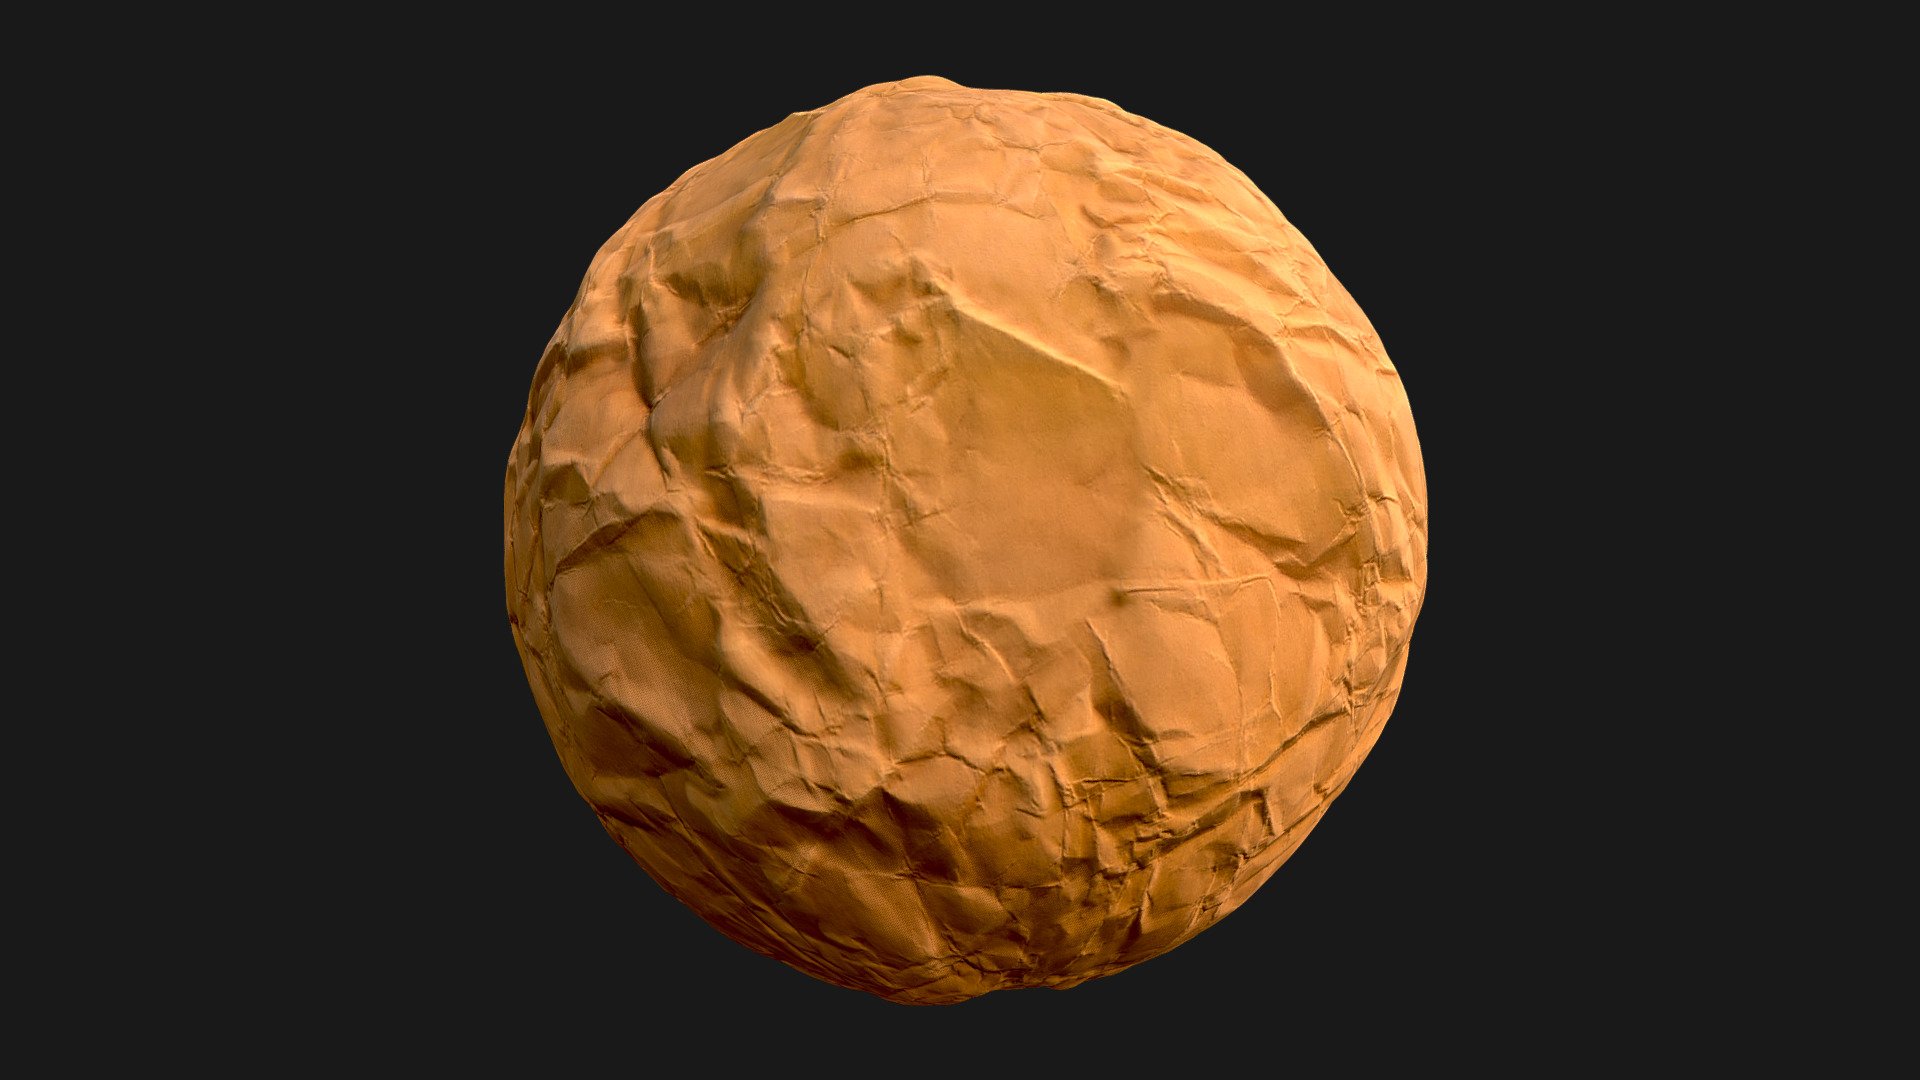 Crumpled paper 2K seamless PBR texture.

Resolution - 2048 x 2048 px

Seamless - Yes, X and Y

PBR - Yes

Format - TIFF and JPEG

Bit depth - 16bit for height (TIFF only), 8bit for the rest

Maps - Albedo, AO, Bump, Glossiness, Roughness, Height, Normals (DirectX, -Y)

Coverage area - 50 x 50 cm

Scanned - No

Rendered in Marmoset Toolbag 3d model